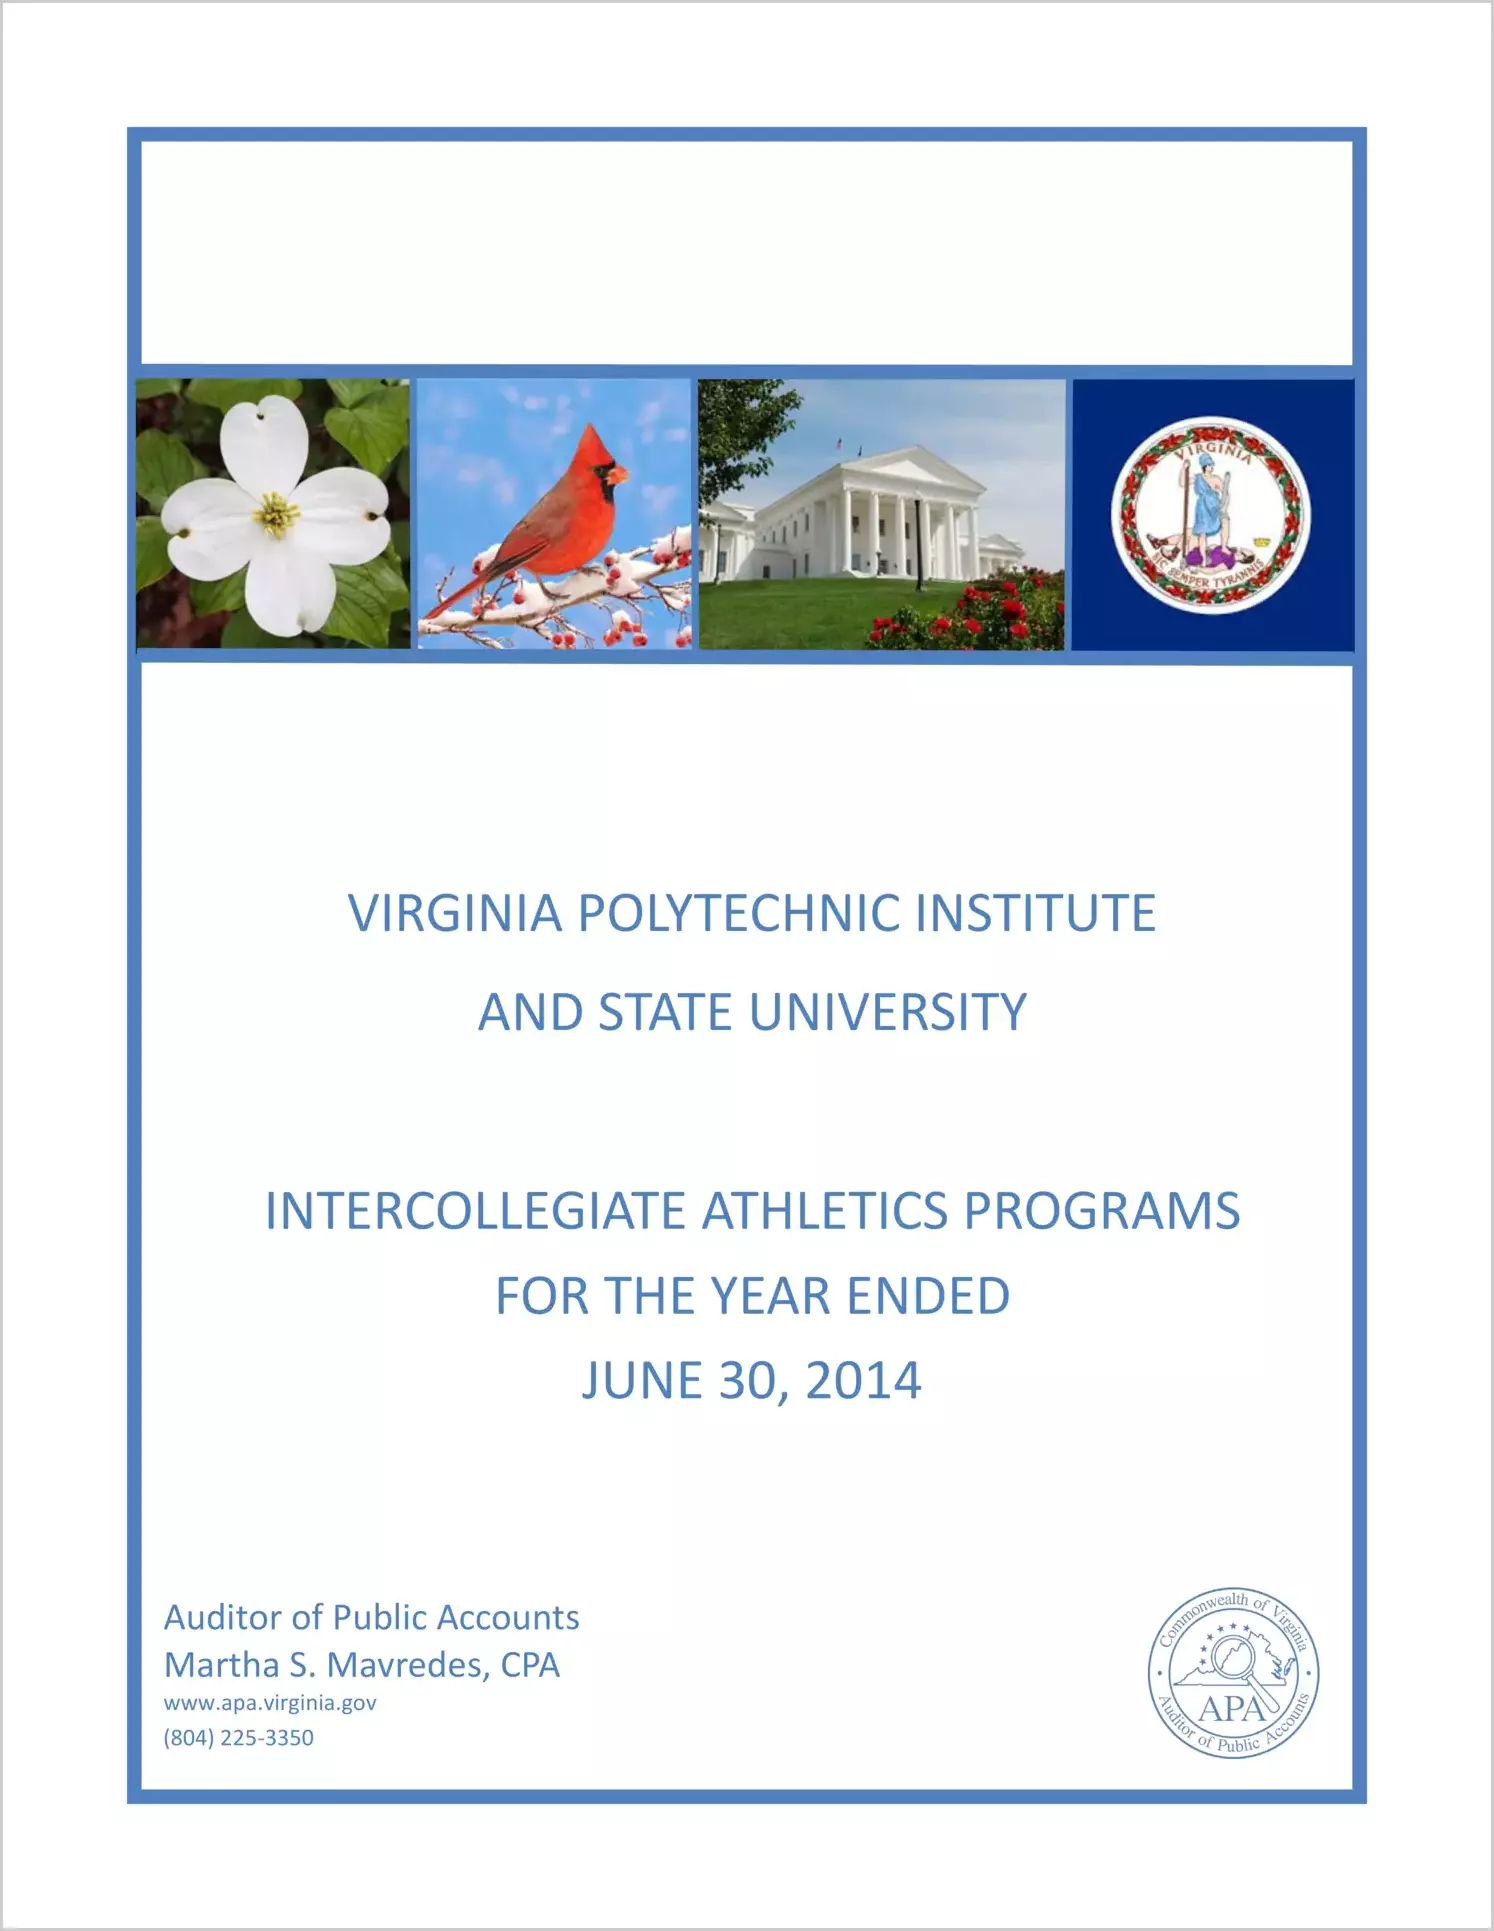 Virginia Polytechnic Institute and State University Intercollegiate Athletics Programs for the year ended June 30, 2014